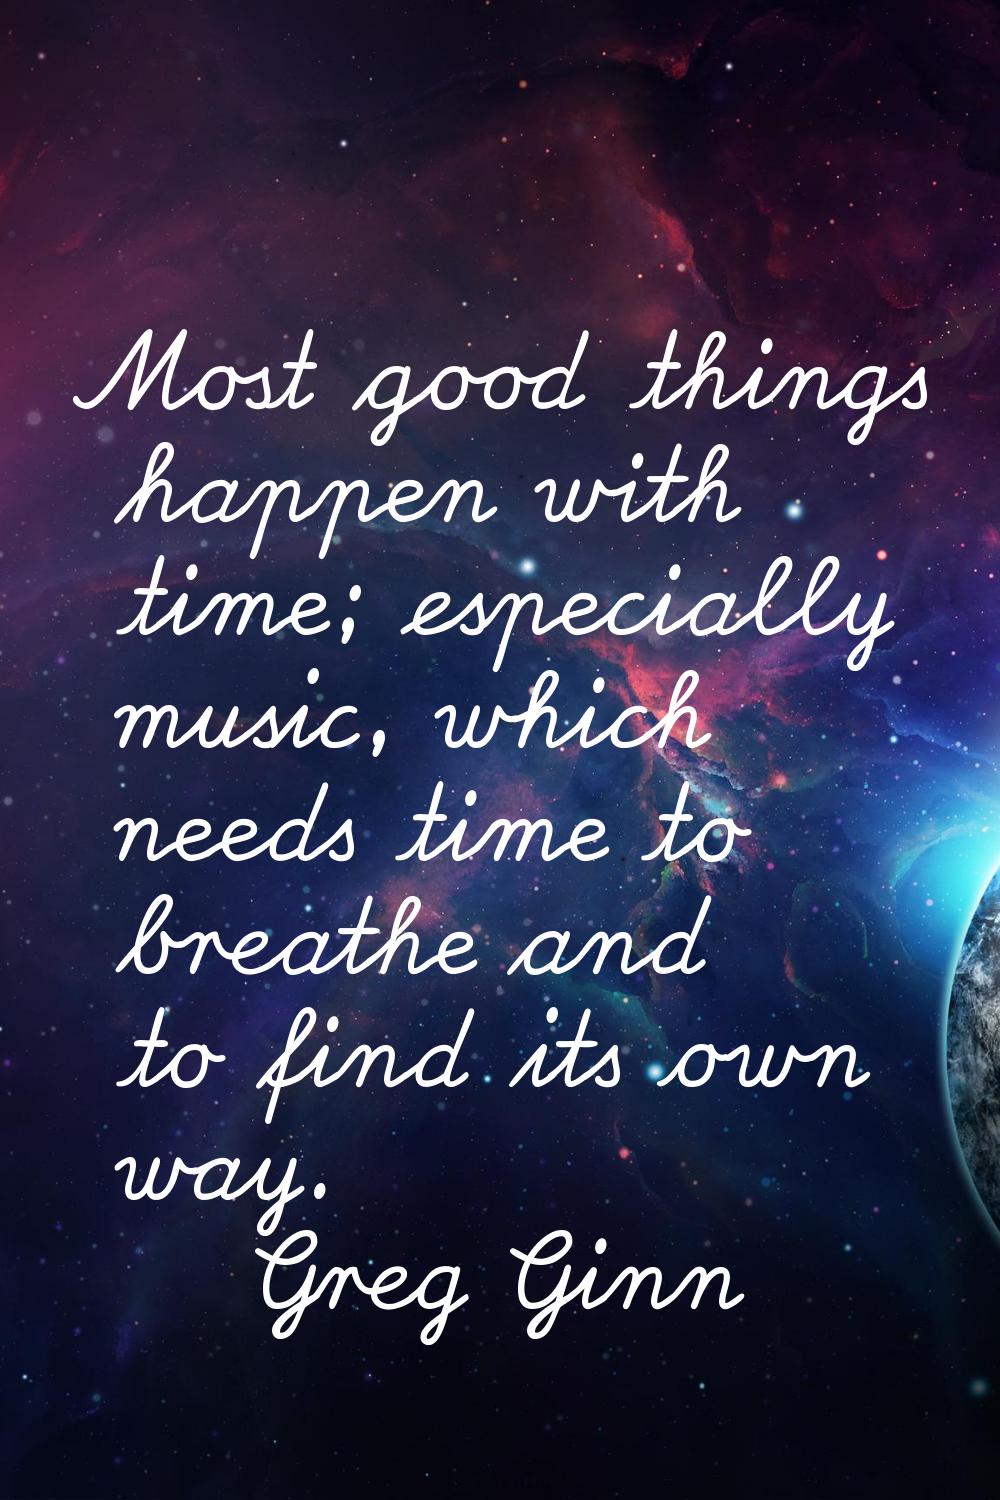 Most good things happen with time; especially music, which needs time to breathe and to find its ow